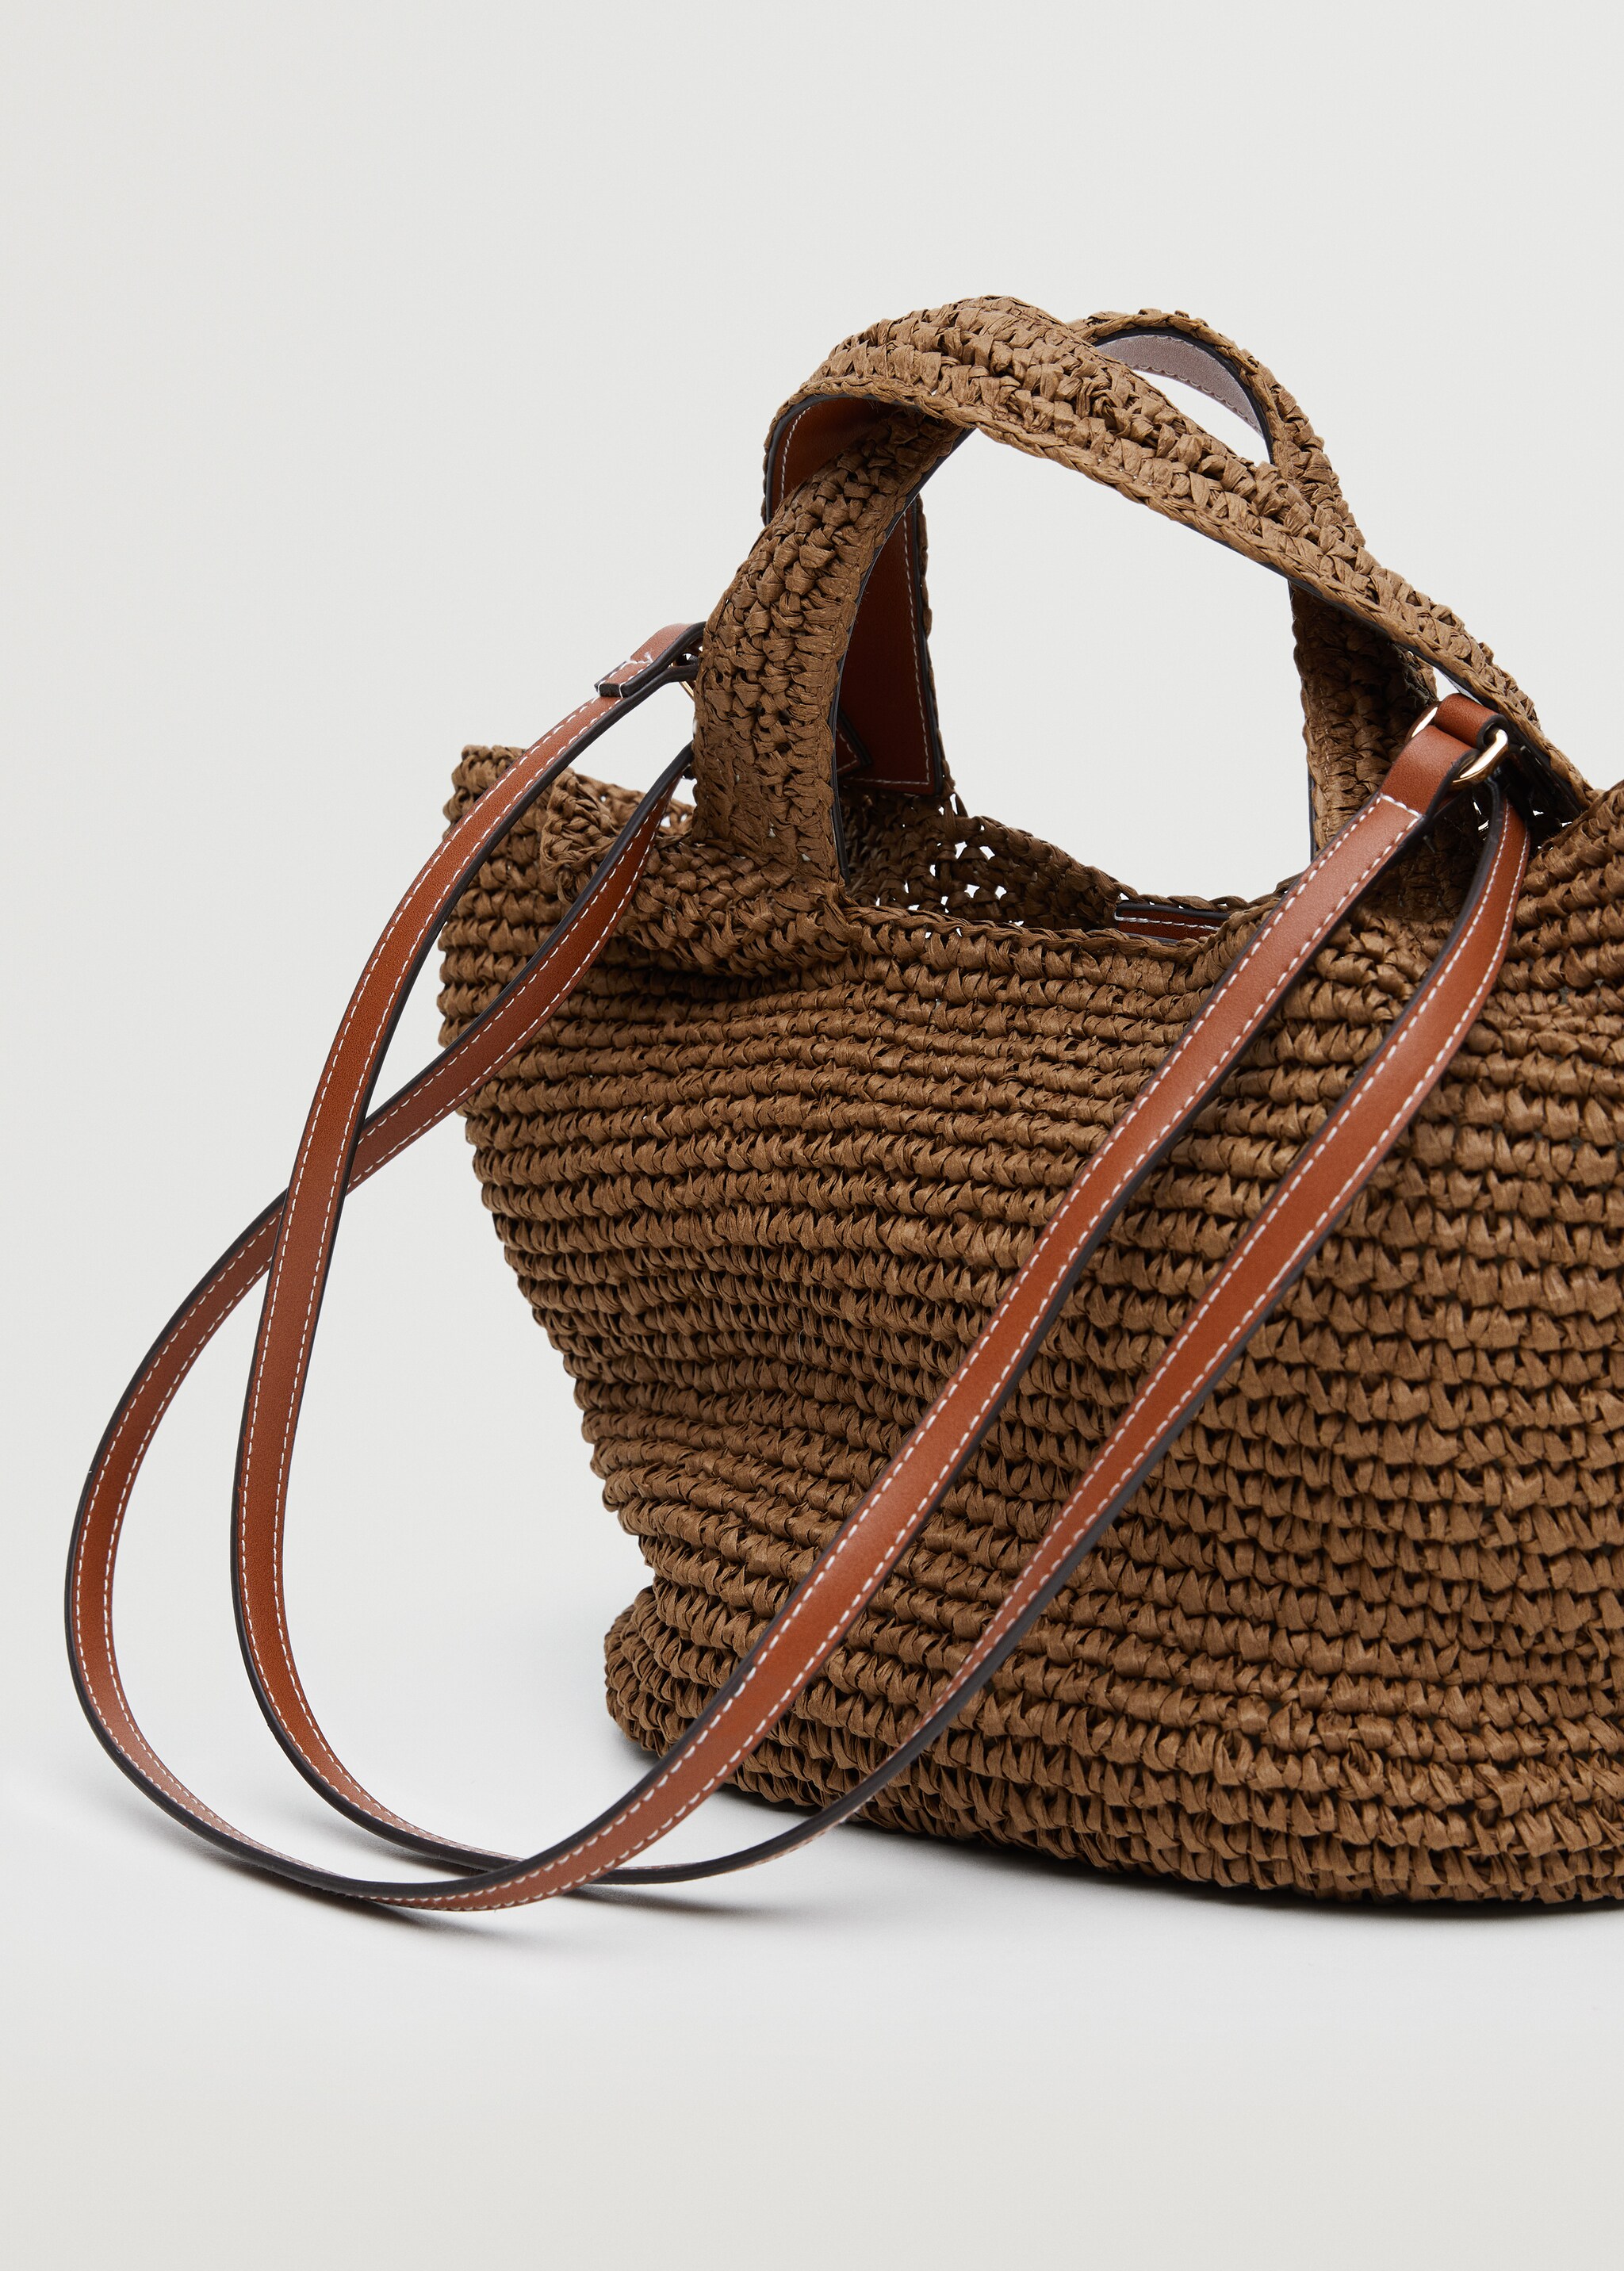 Braided shopper bag - Details of the article 3